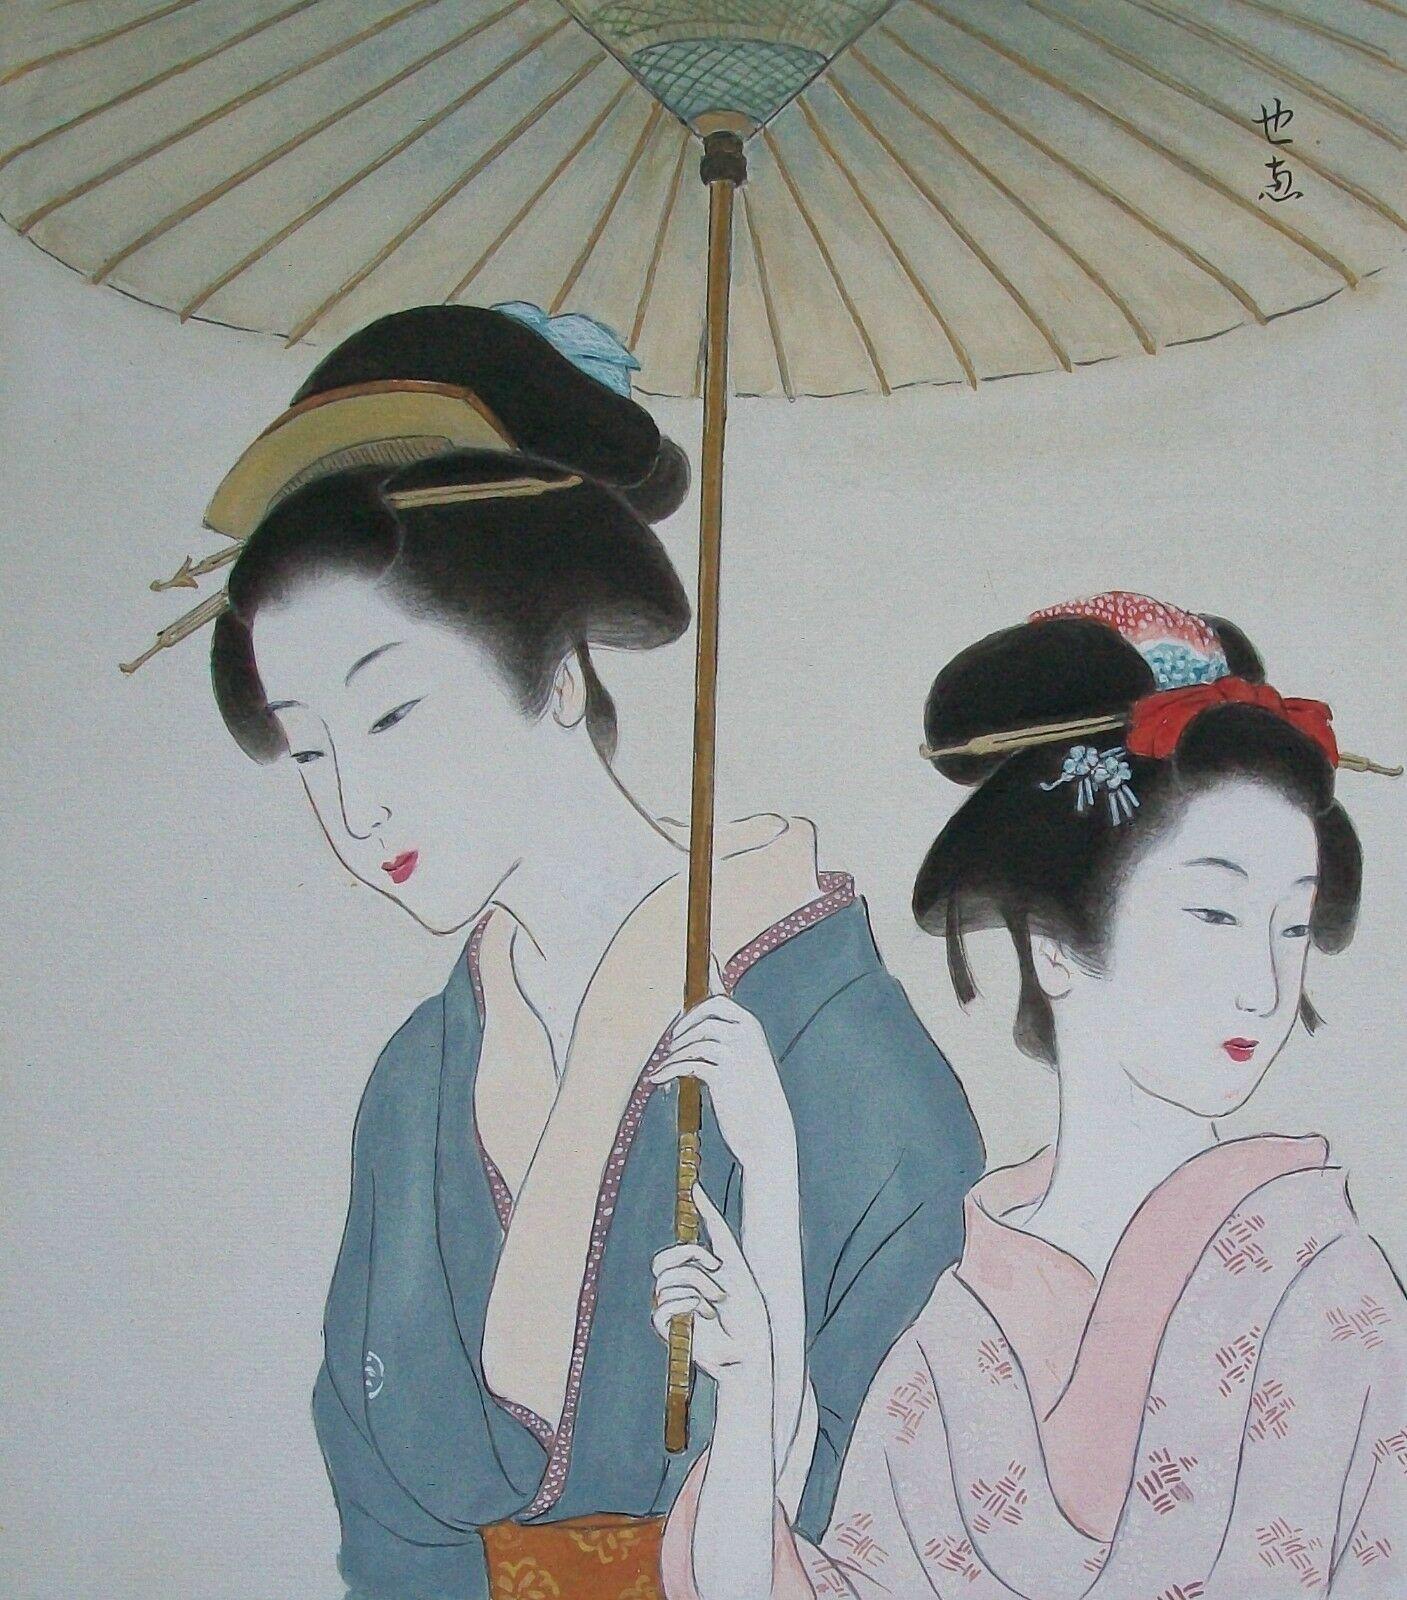 Vintage watercolor painting of two Geisha under an umbrella - watercolor over graphite with gold gilt border - signed upper right (unidentified artist/maker) - unframed - Japan - late 20th century. 

Excellent vintage condition - no loss - no